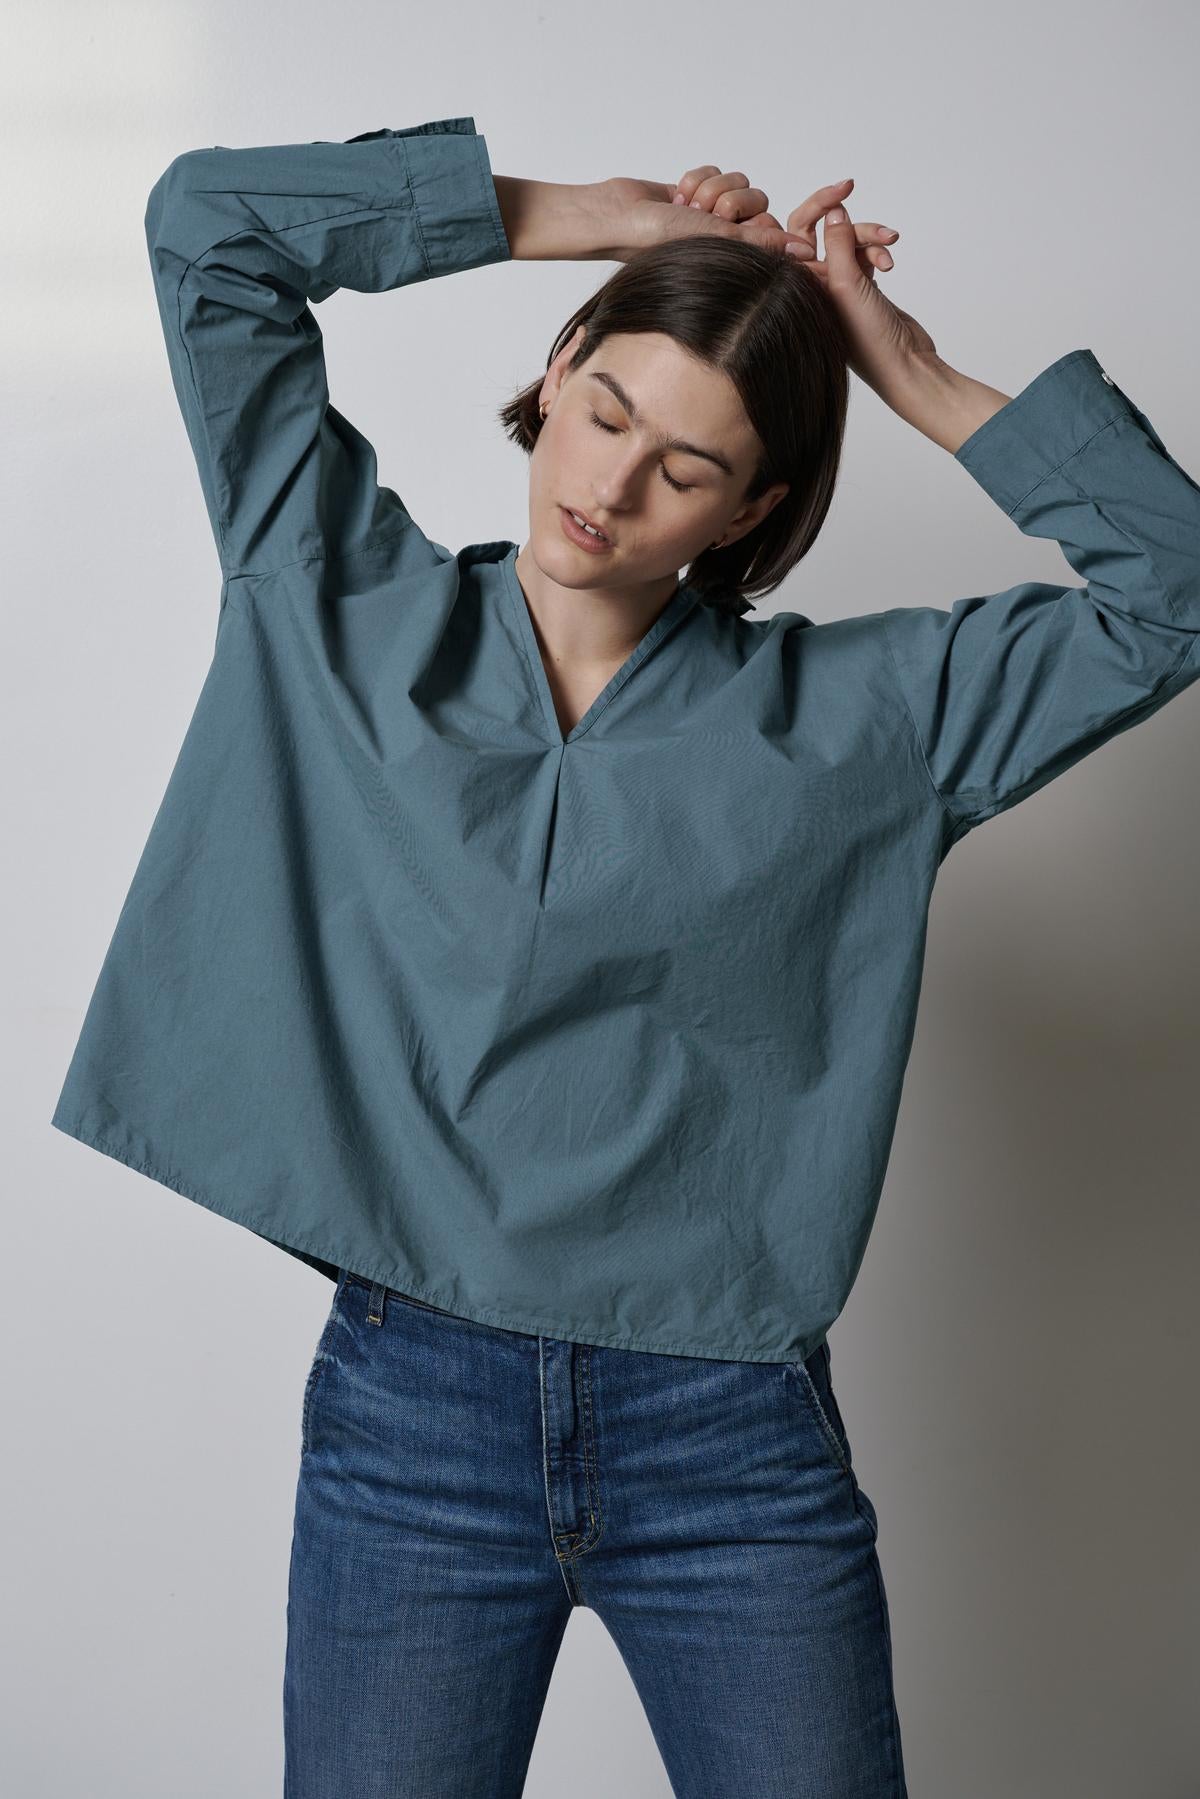 A woman wearing jeans and a Velvet by Jenny Graham BREA SHIRT.-35190117728449